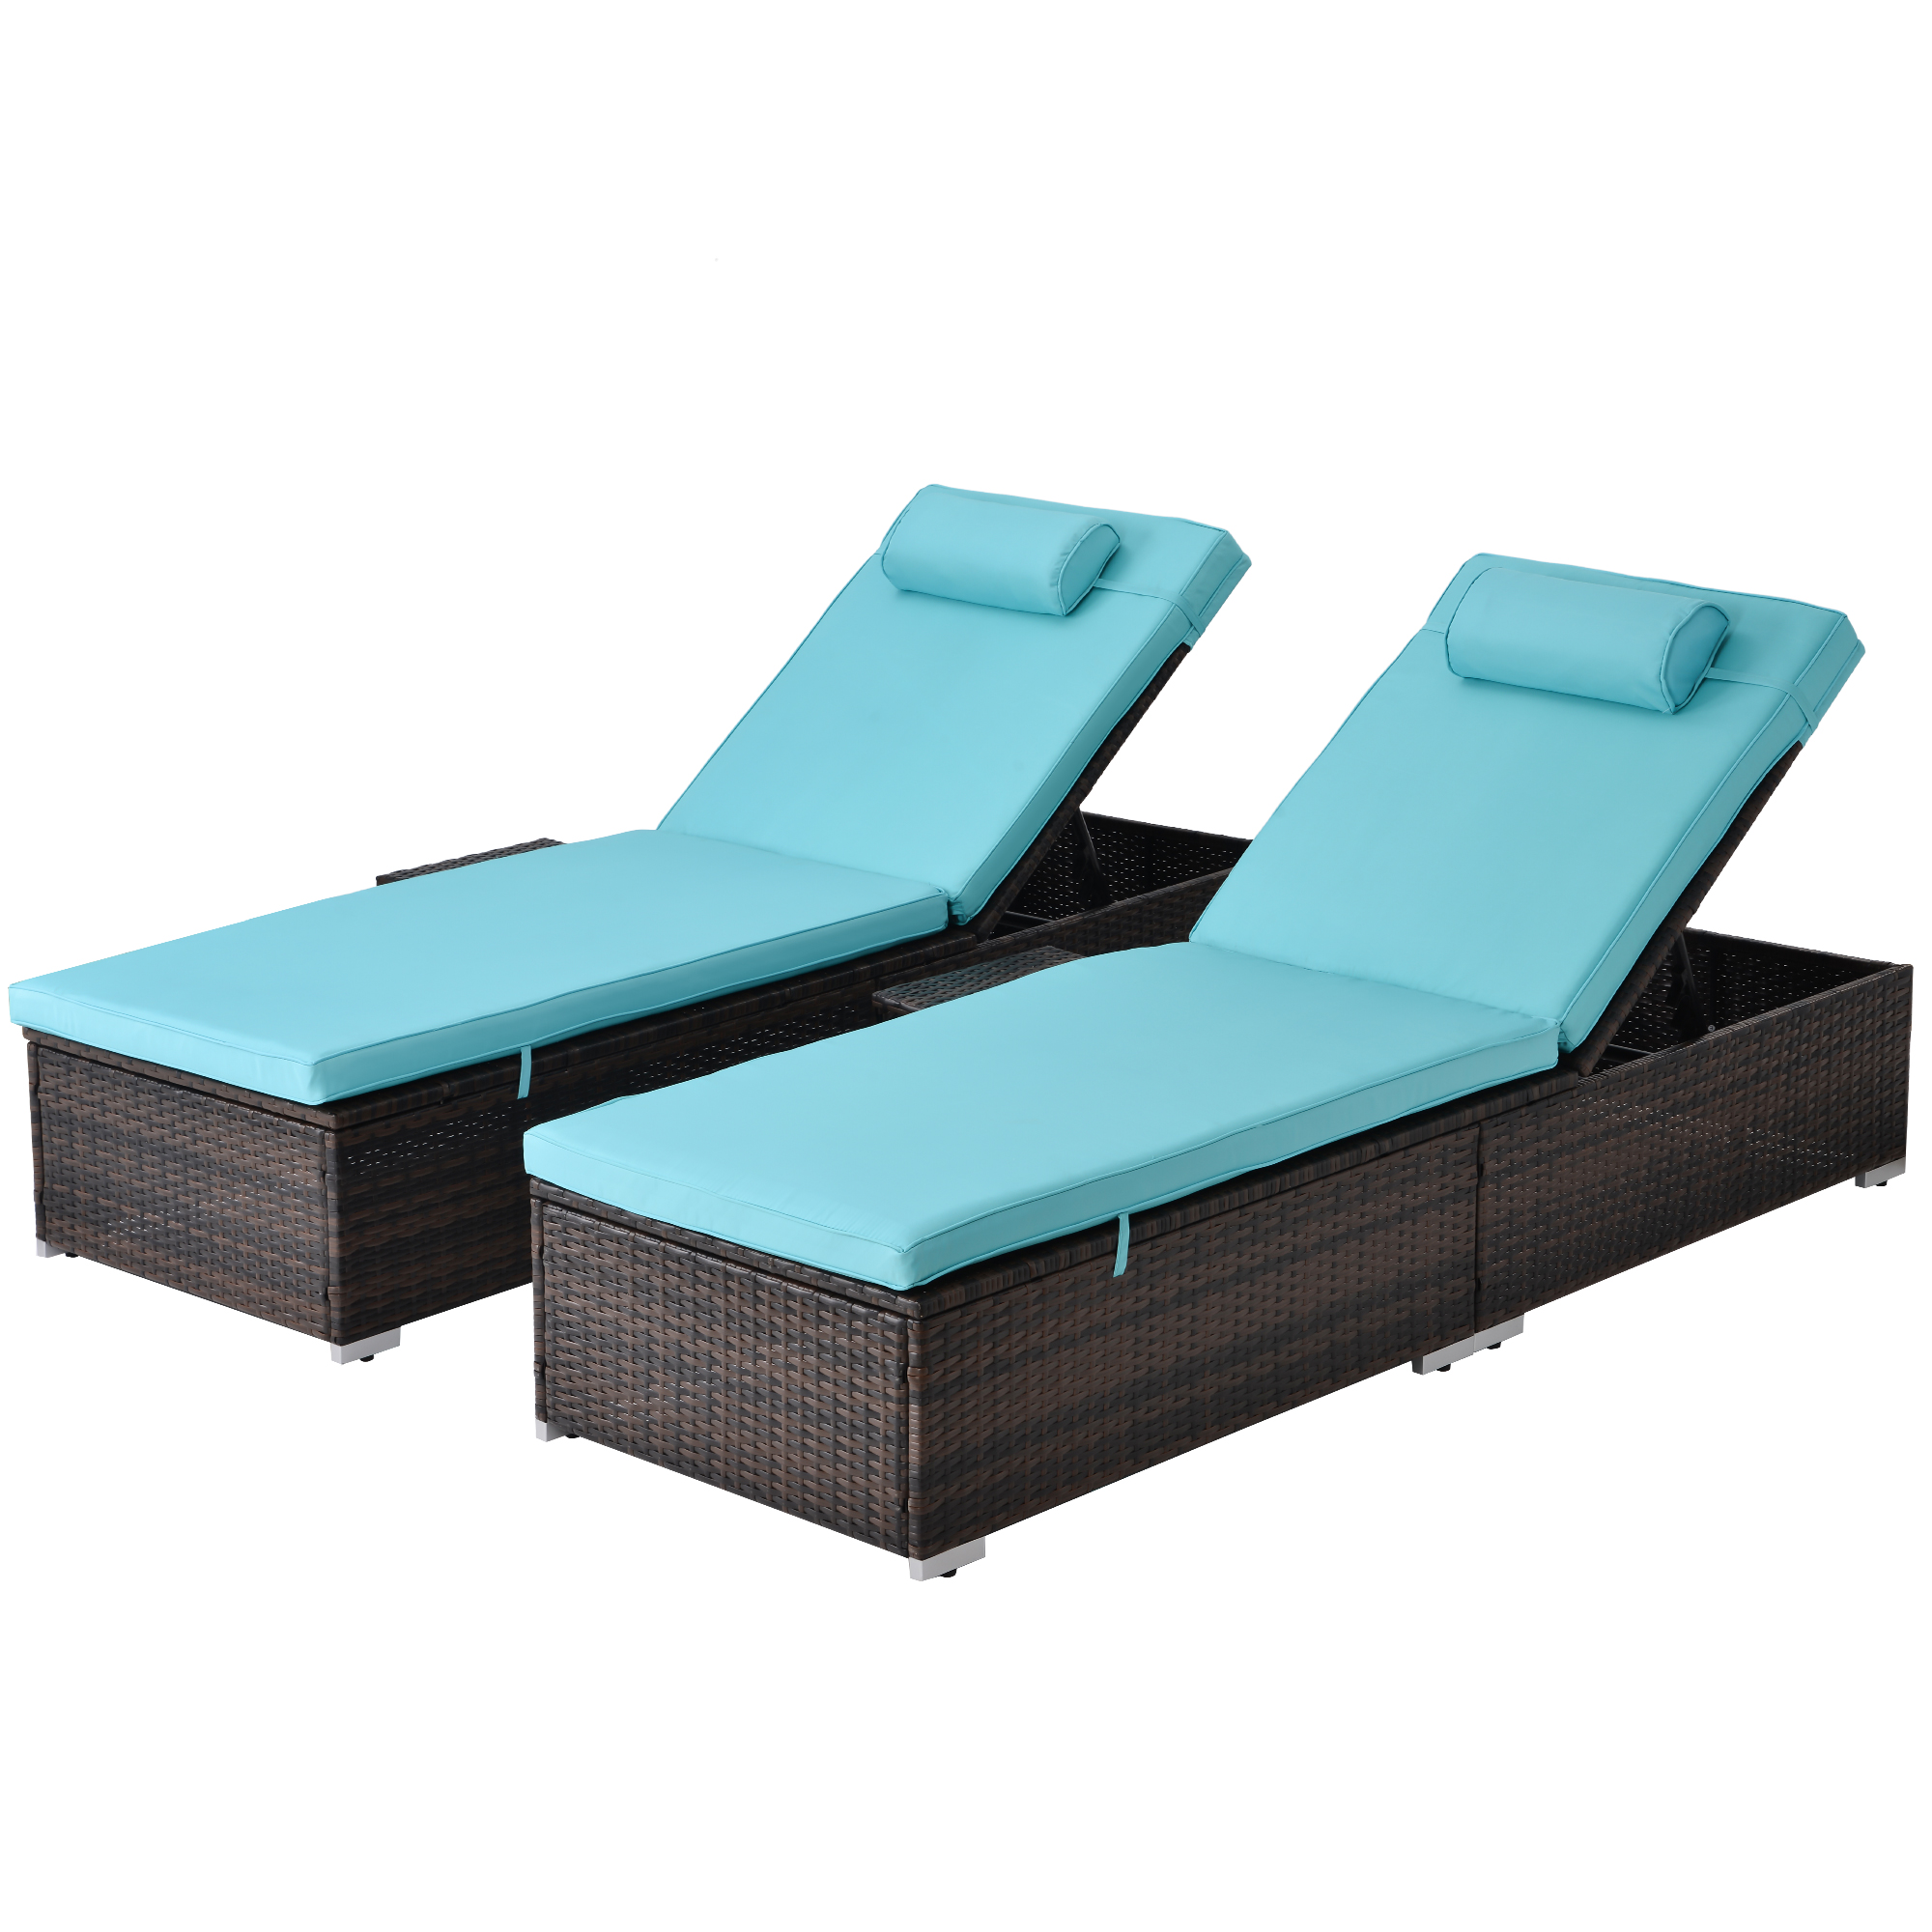 Outdoor PE Wicker Chaise Lounge Set, 2 Piece Garden Adjustable Chaise Lounge, Patio Rattan Reclining Chair Furniture Set, Beach Pool Adjustable Backrest Recliners with Blue Cushions - image 1 of 9